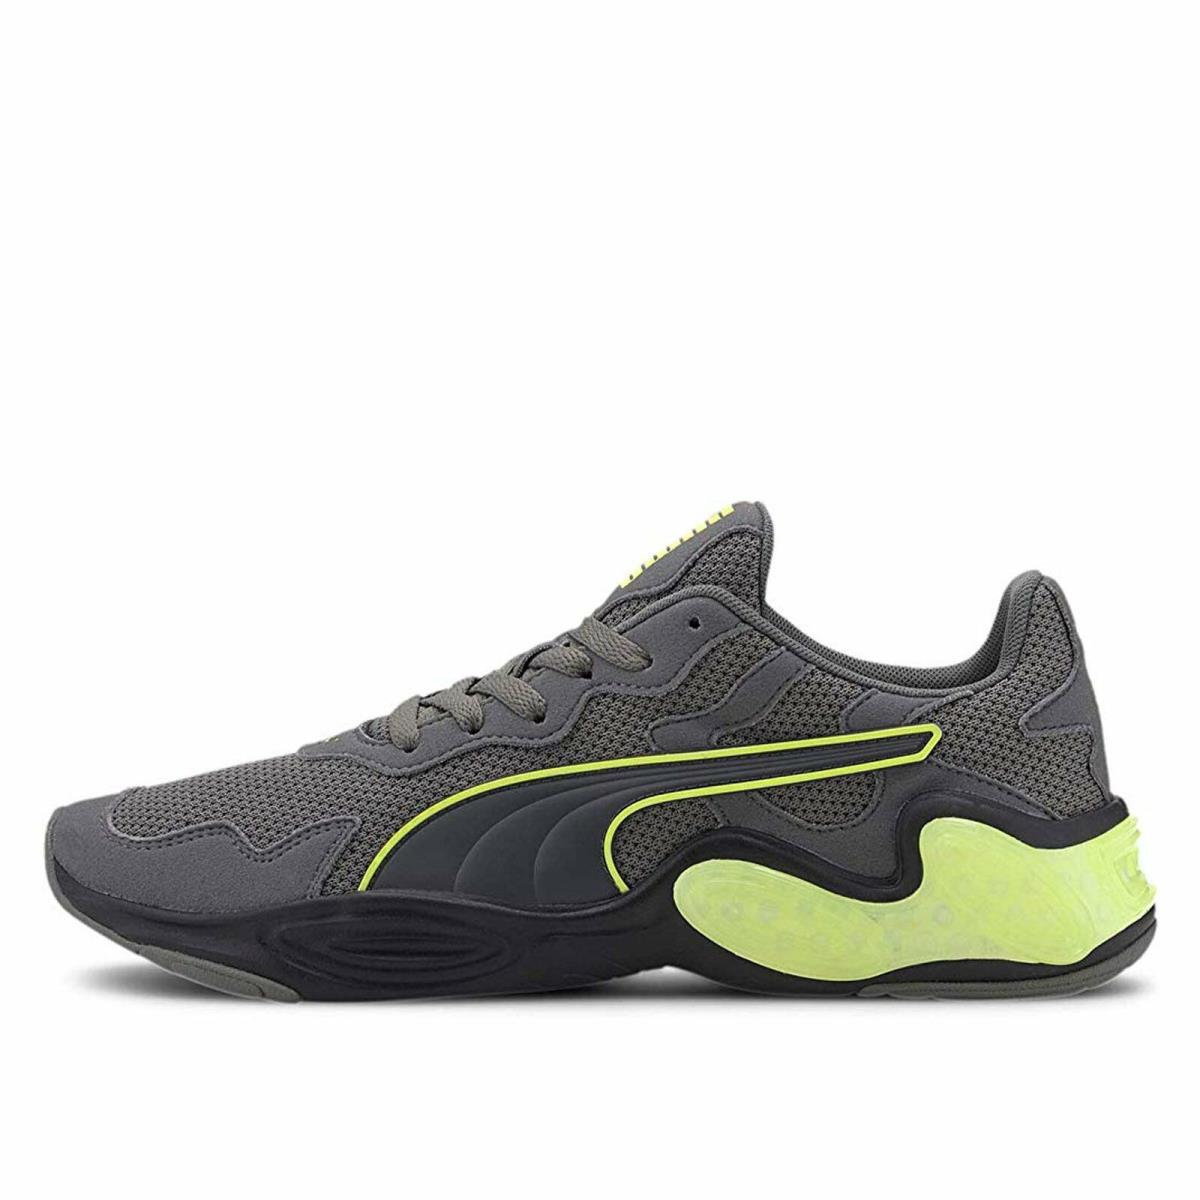 Men`s Shoes Puma Cell Magma Multi Athletic Sneakers 19312601 Castlerock / Yellow